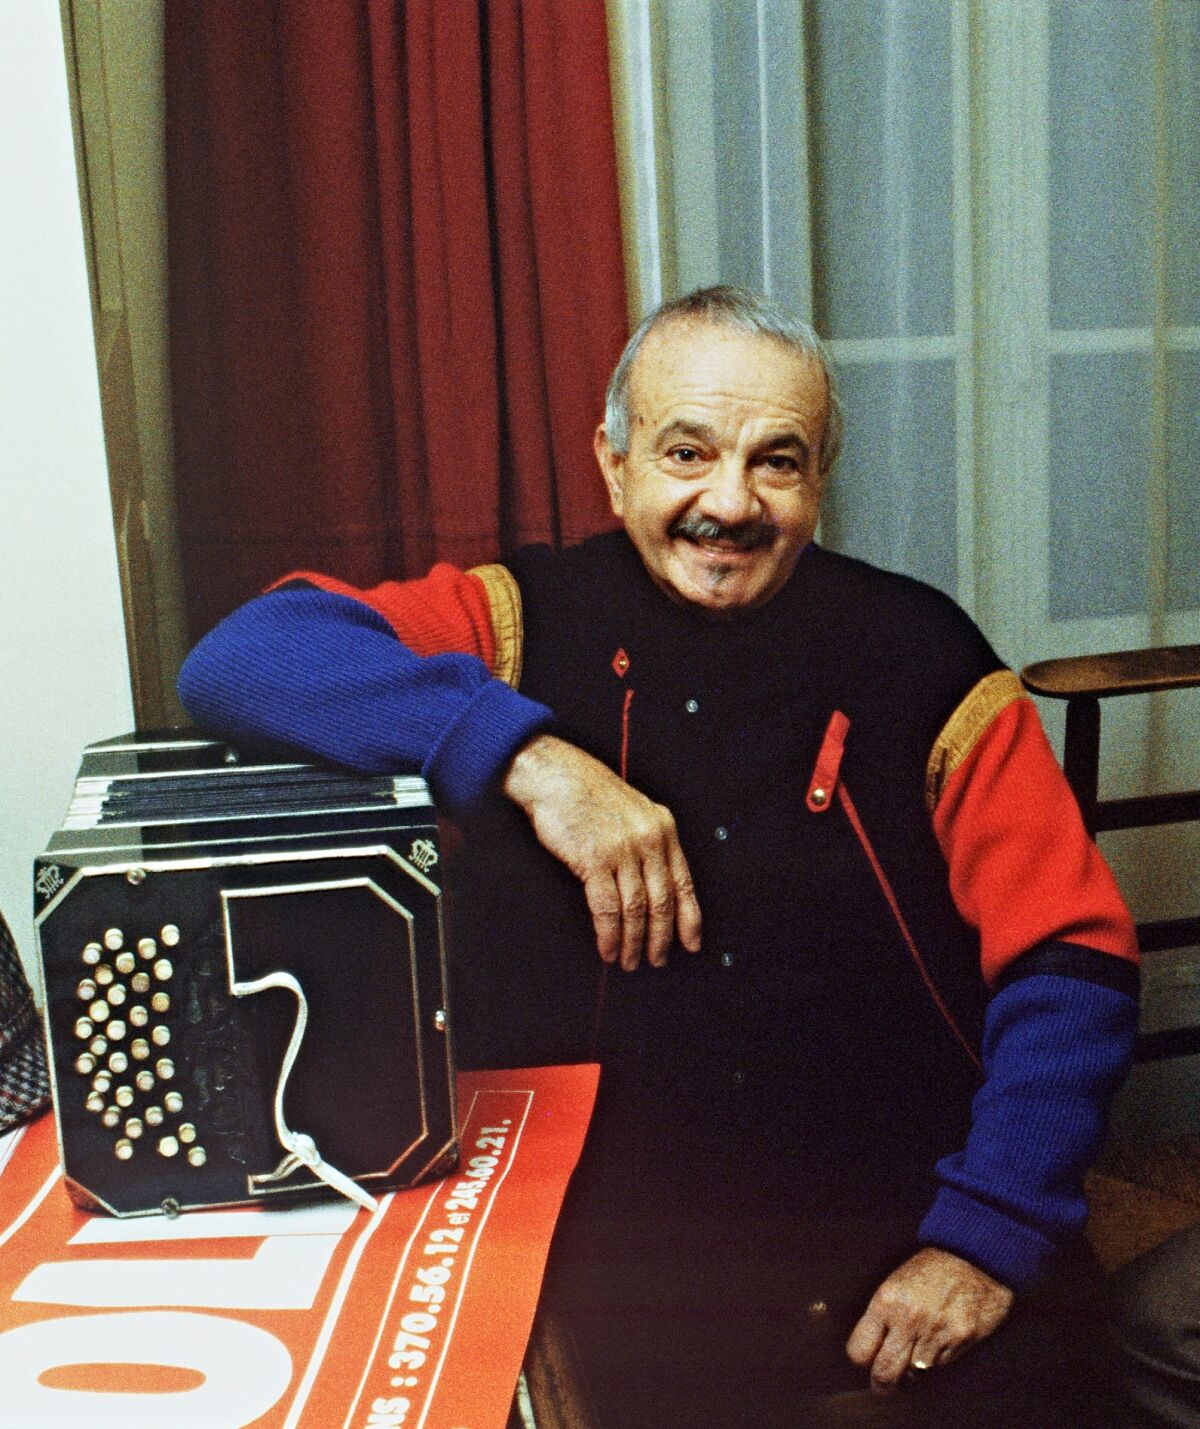 Astor Piazzola poses for a photo with his bandoneón.